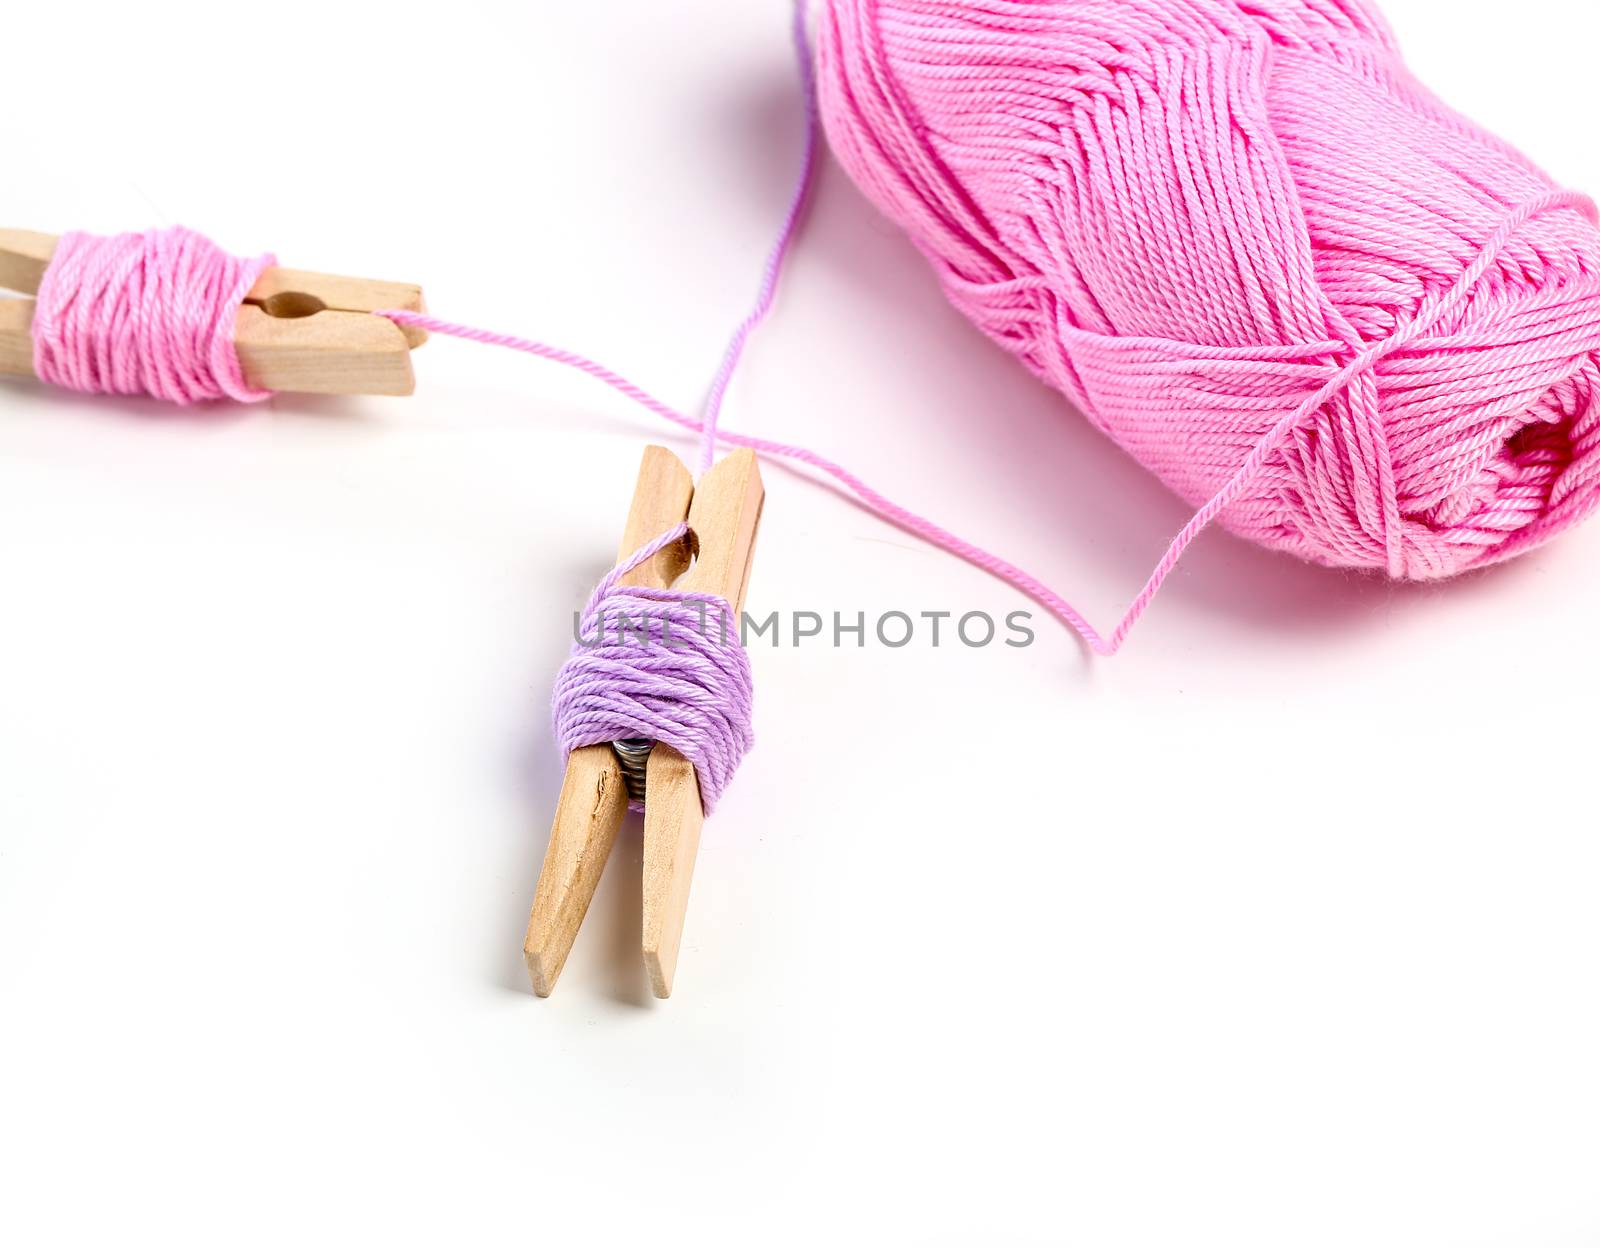 Threads on a white background